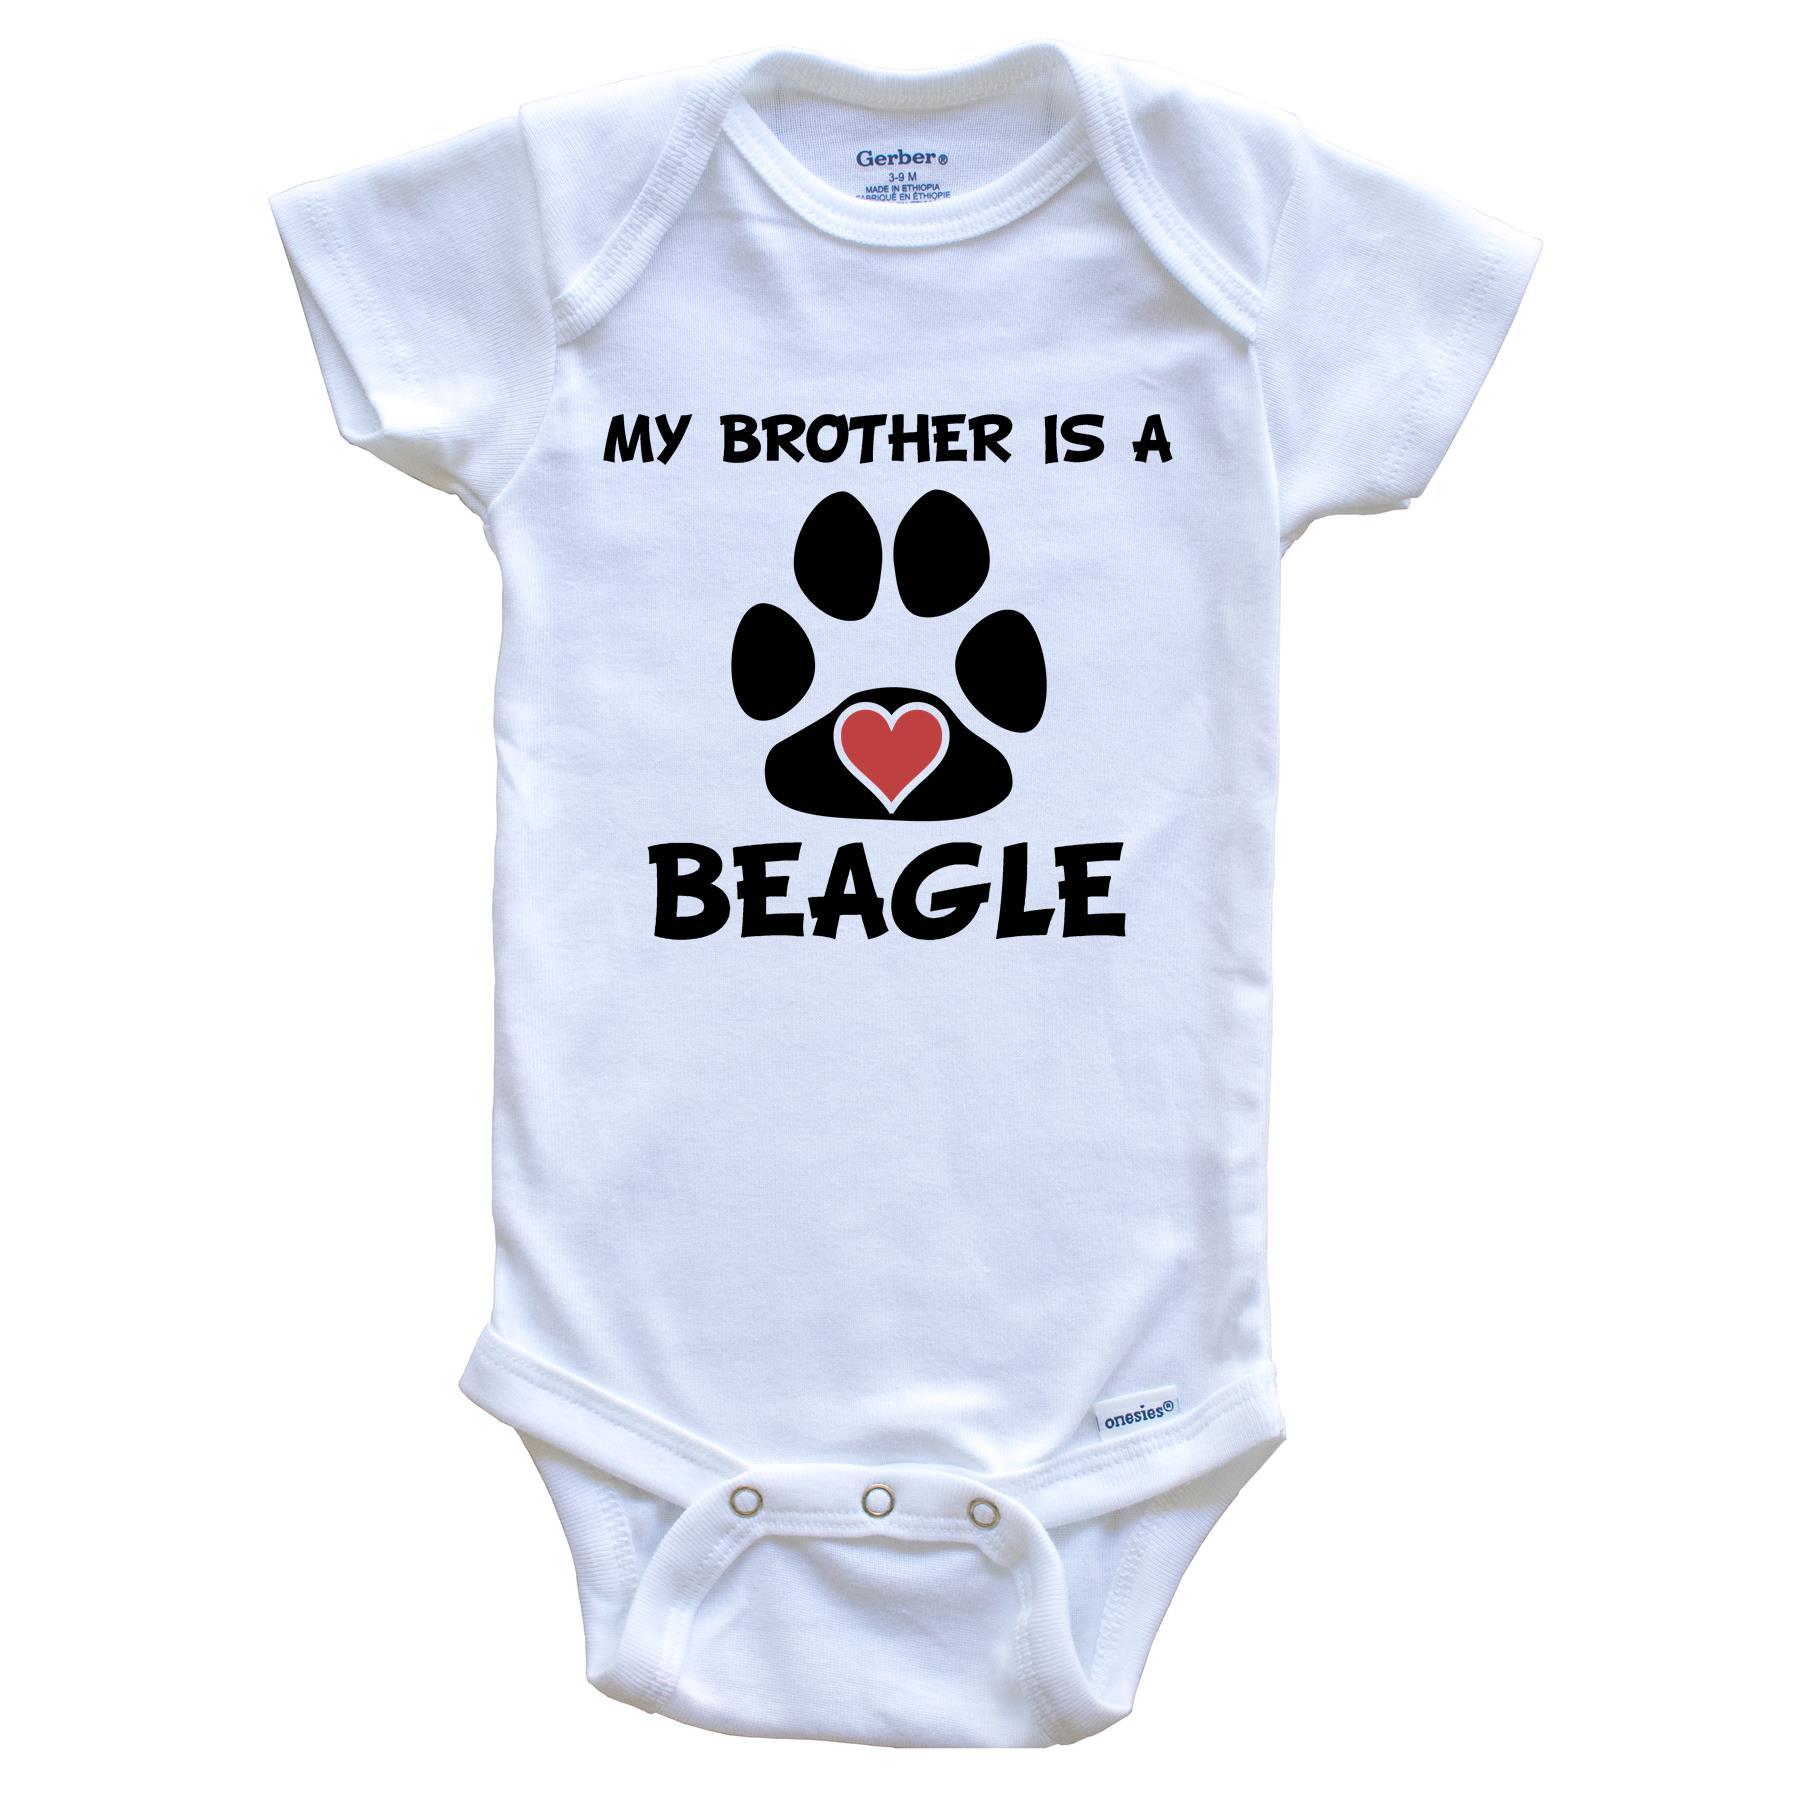 My Brother Is A Beagle Baby Onesie